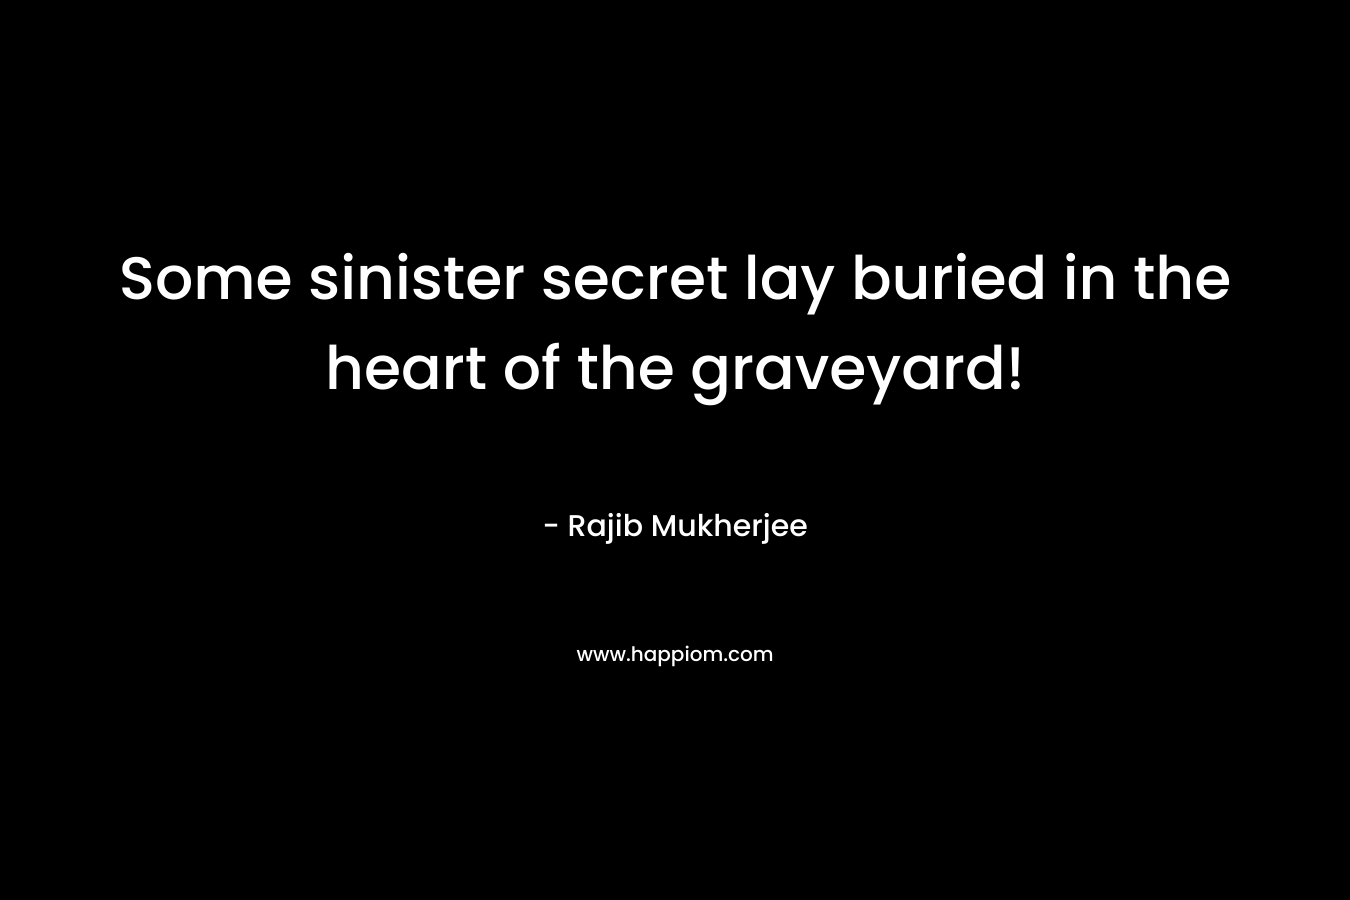 Some sinister secret lay buried in the heart of the graveyard!